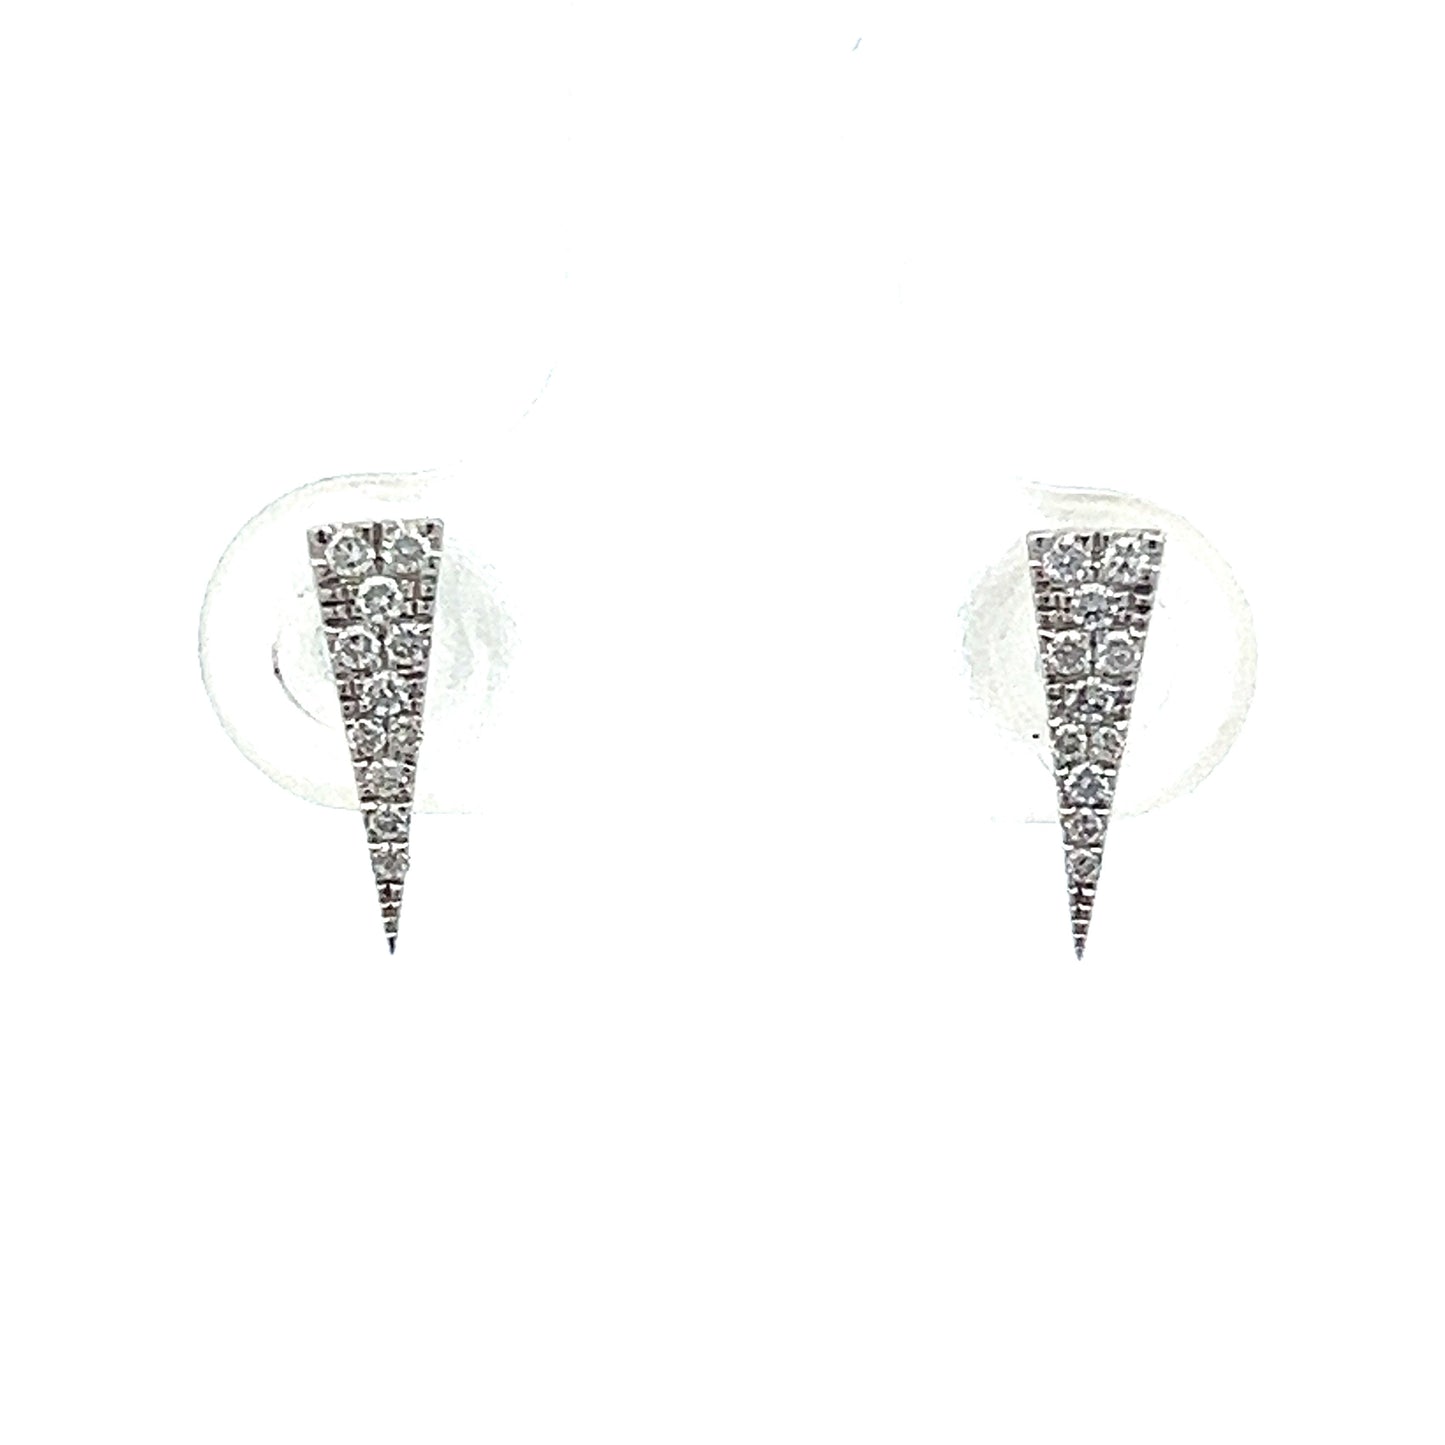 Pave Diamond Triangle Stud Earrings in 14k White Gold